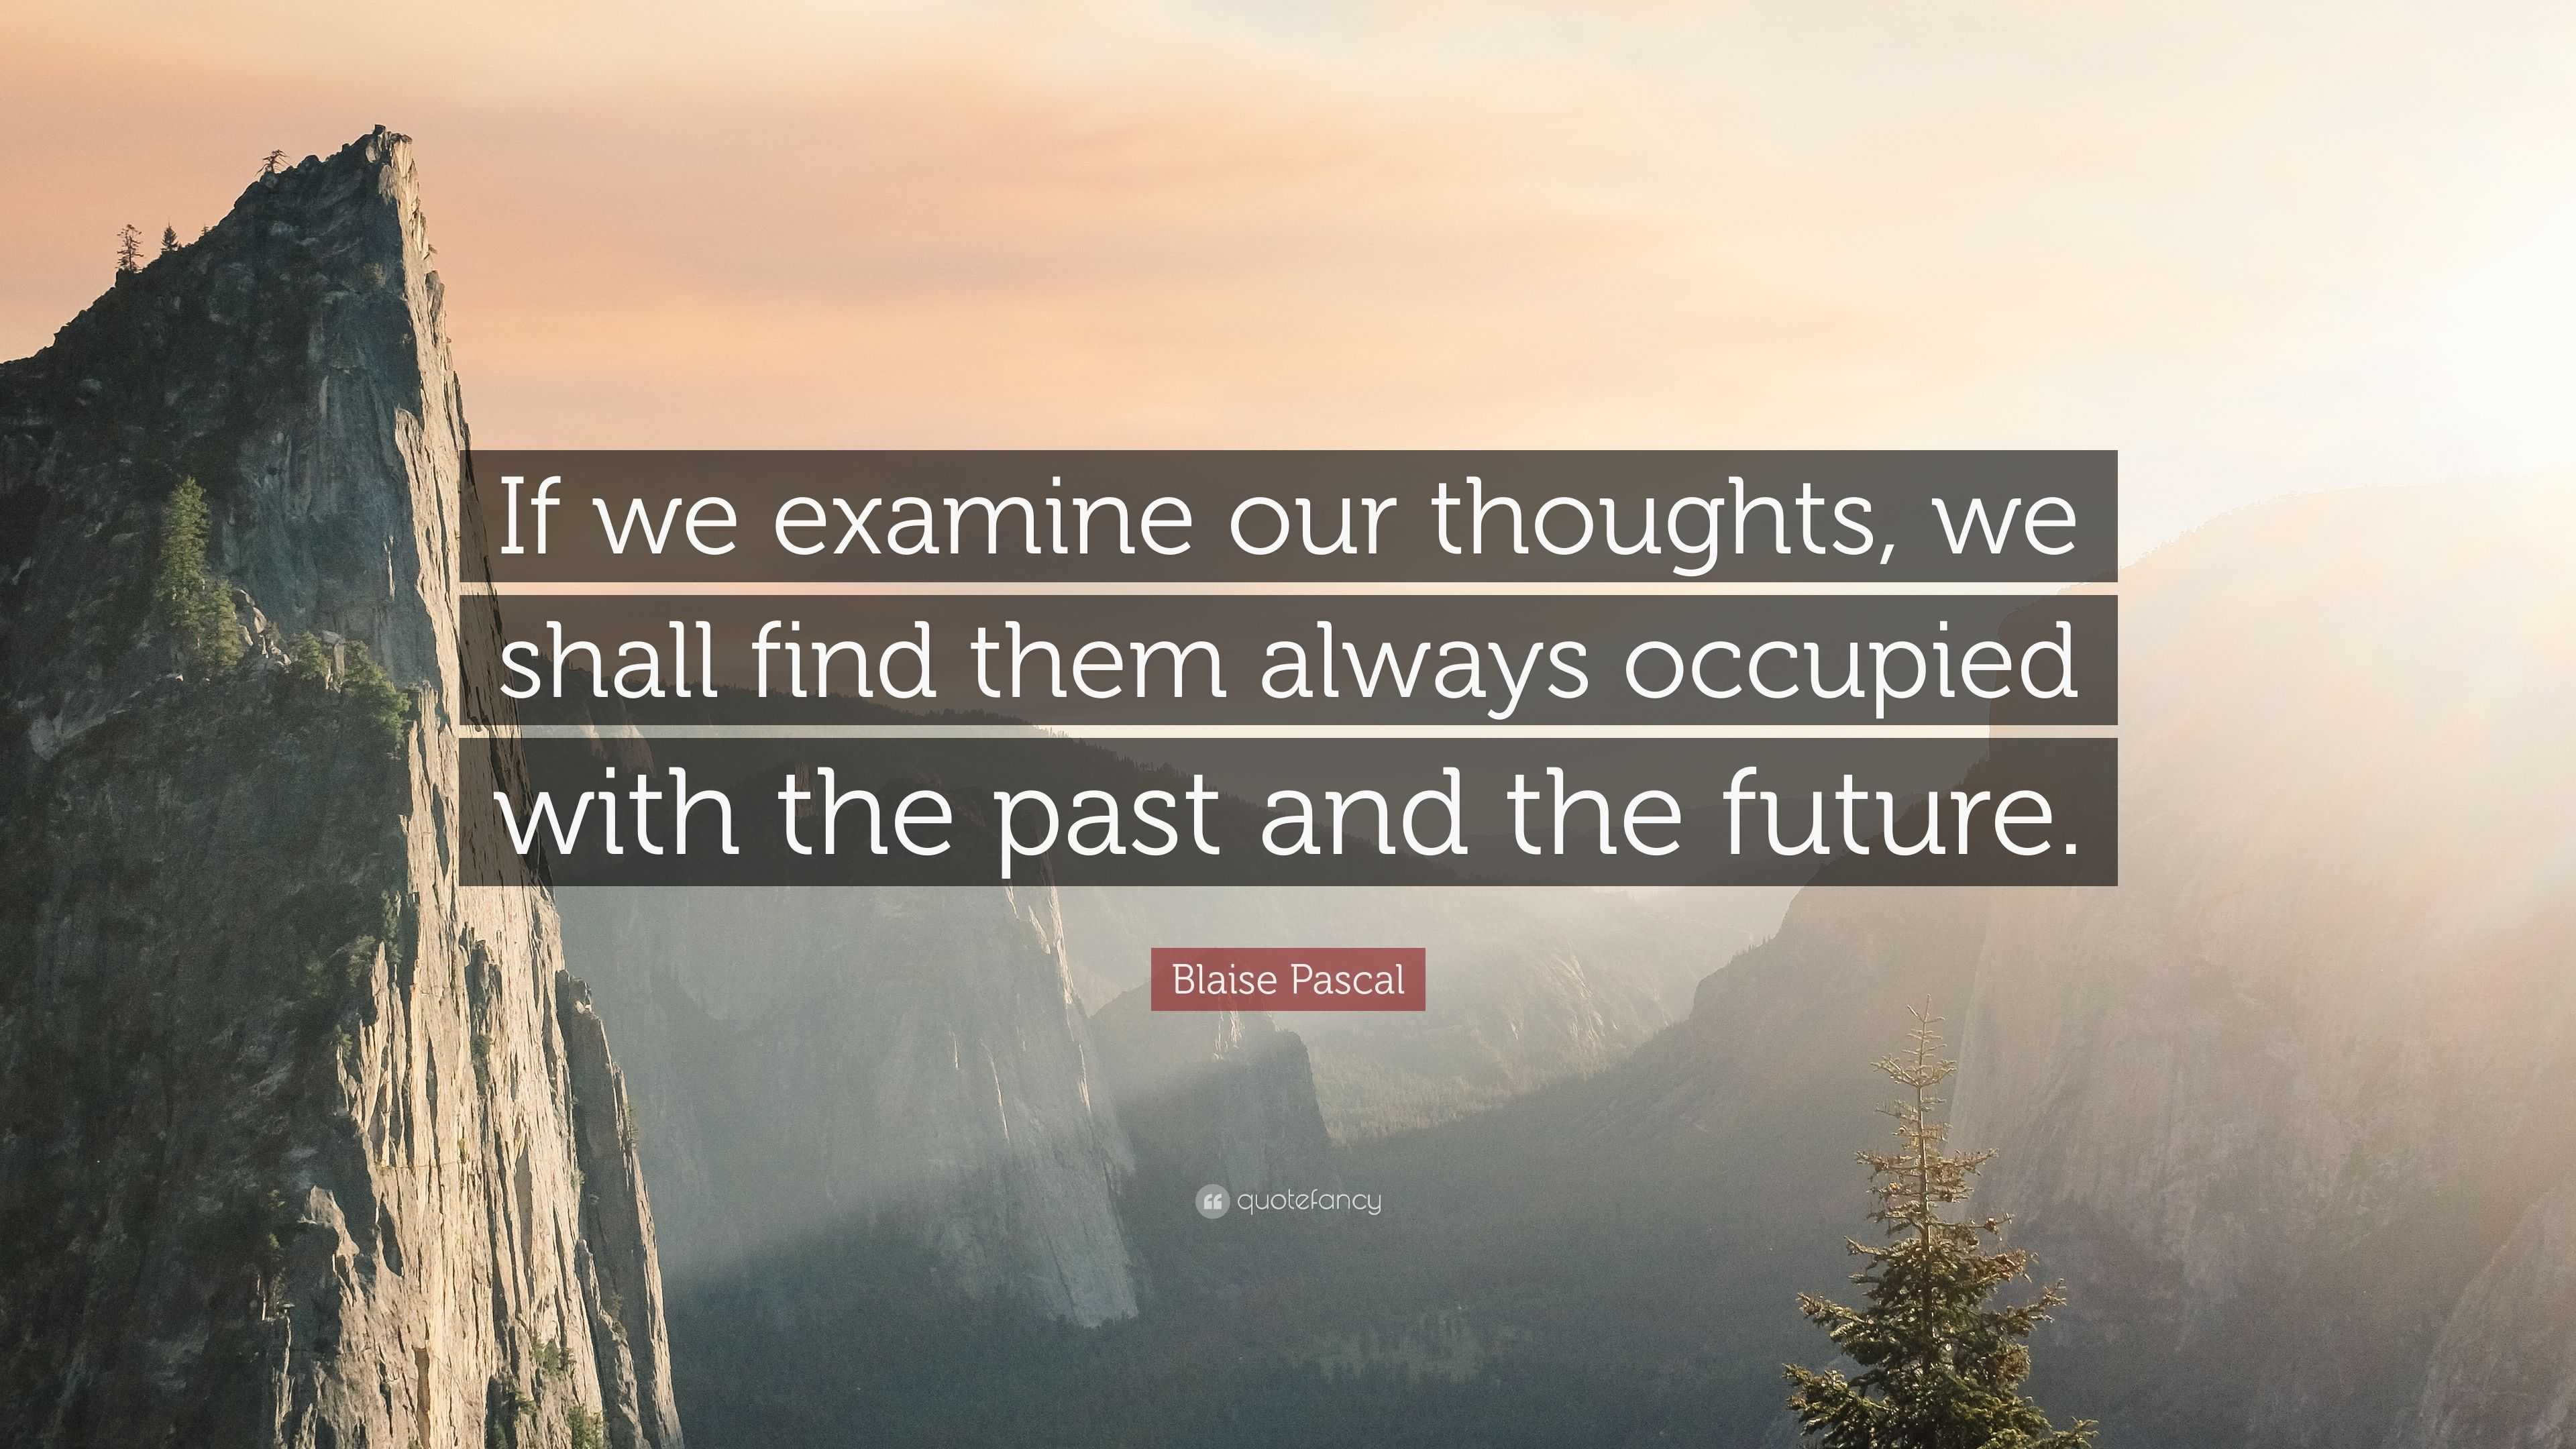 Blaise Pascal Quote: “If we examine our thoughts, we shall find them ...